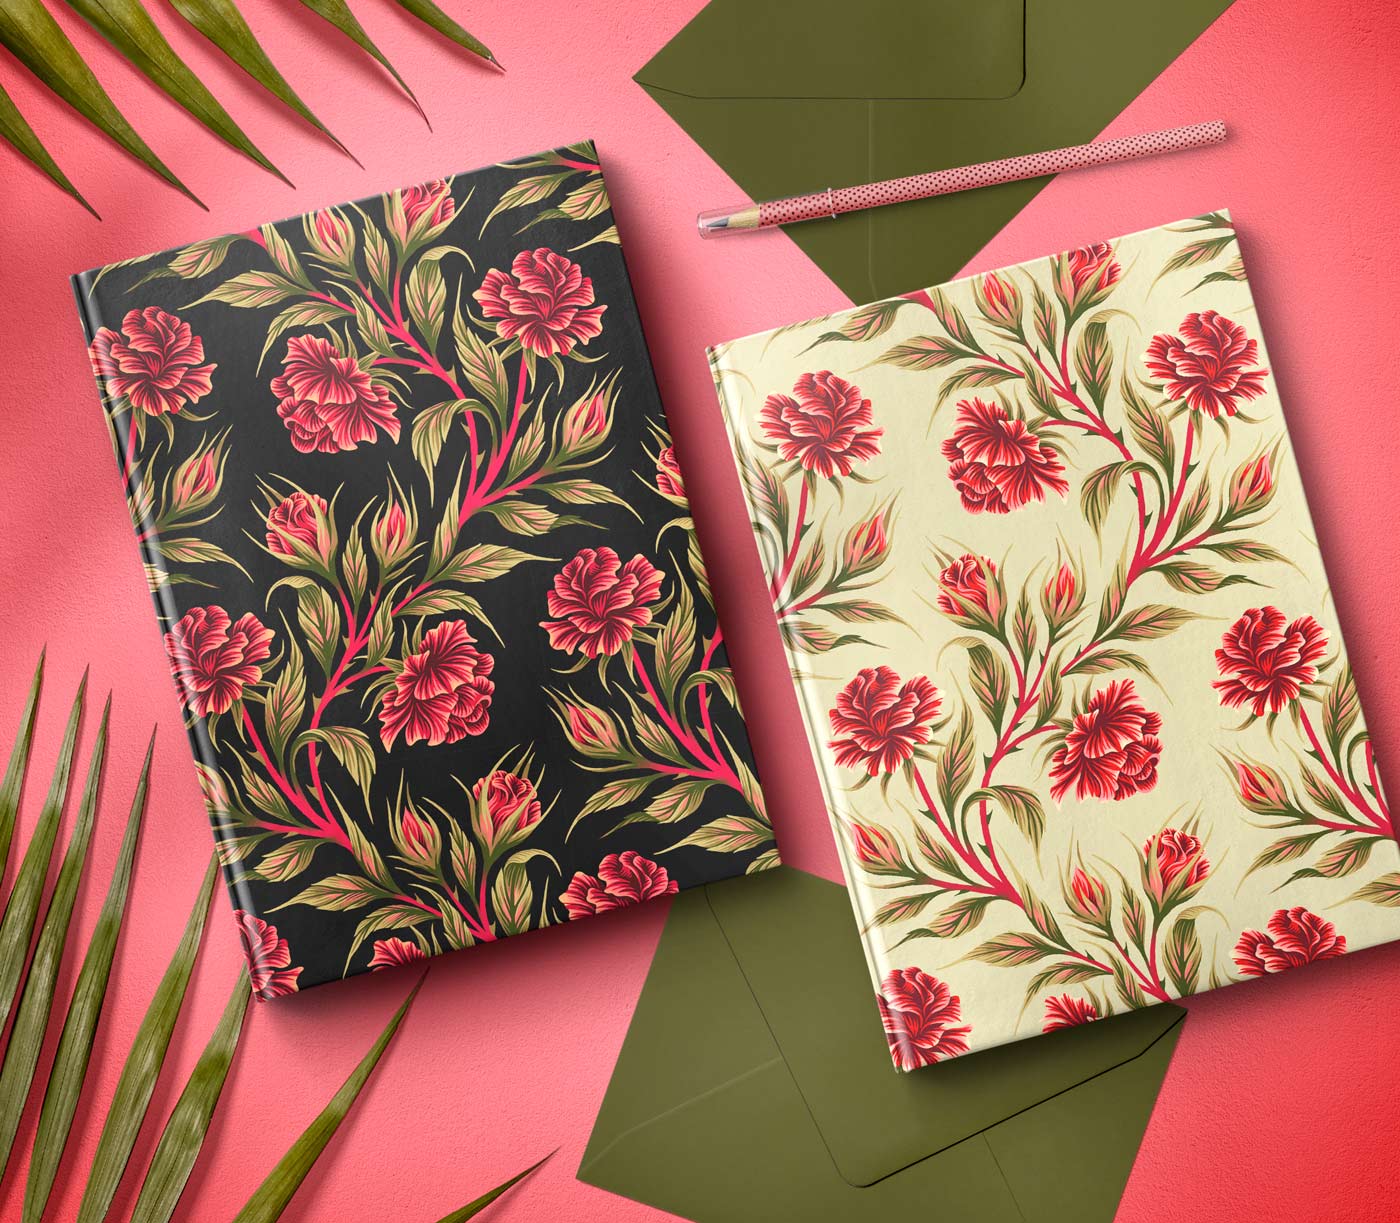 Red and green illustrated roses hardcover journal notebooks by Andrea Muller